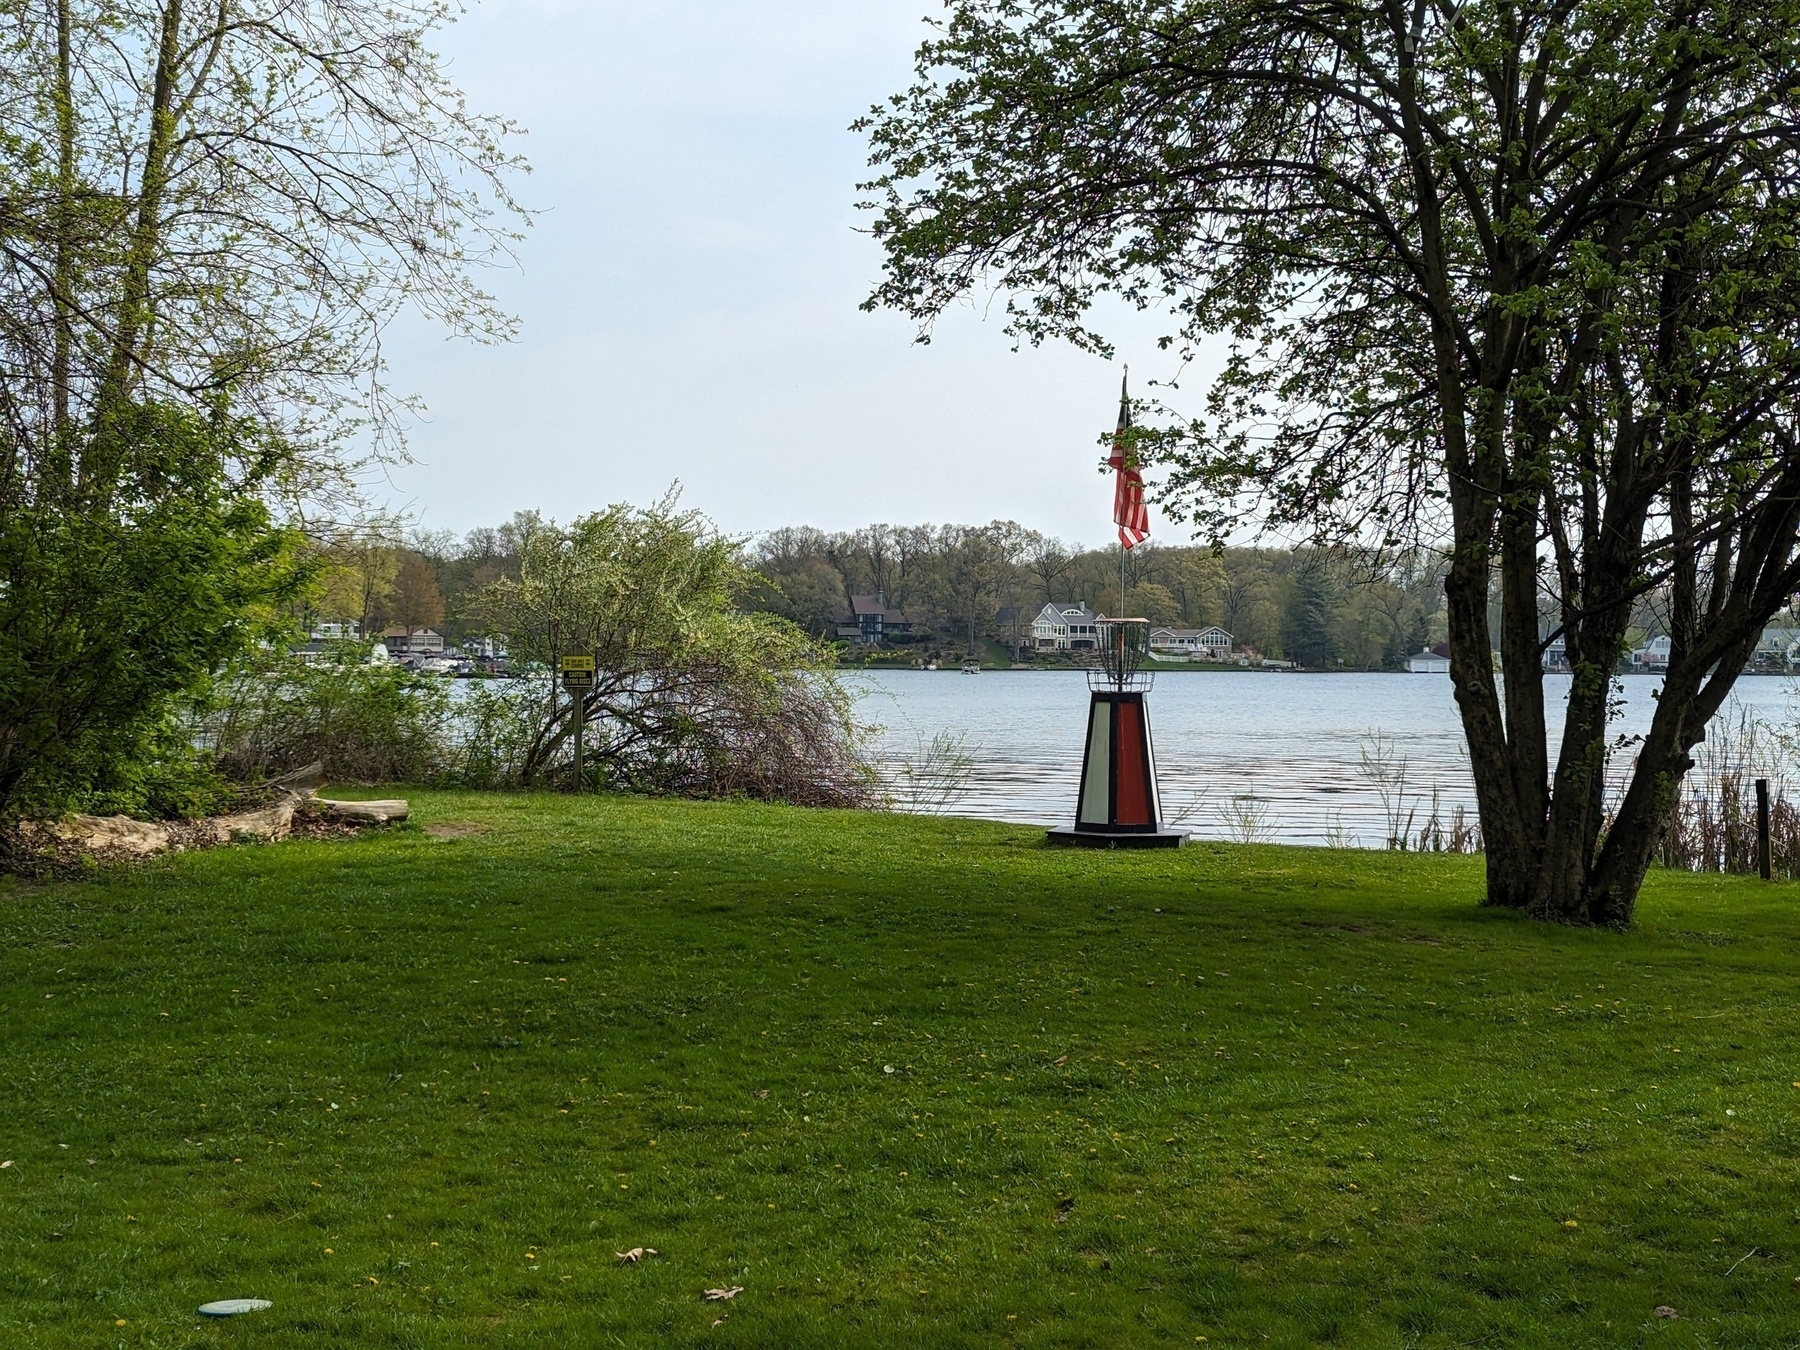 A disc golf basket raised on top of a mini lighthouse with a lake in the background.